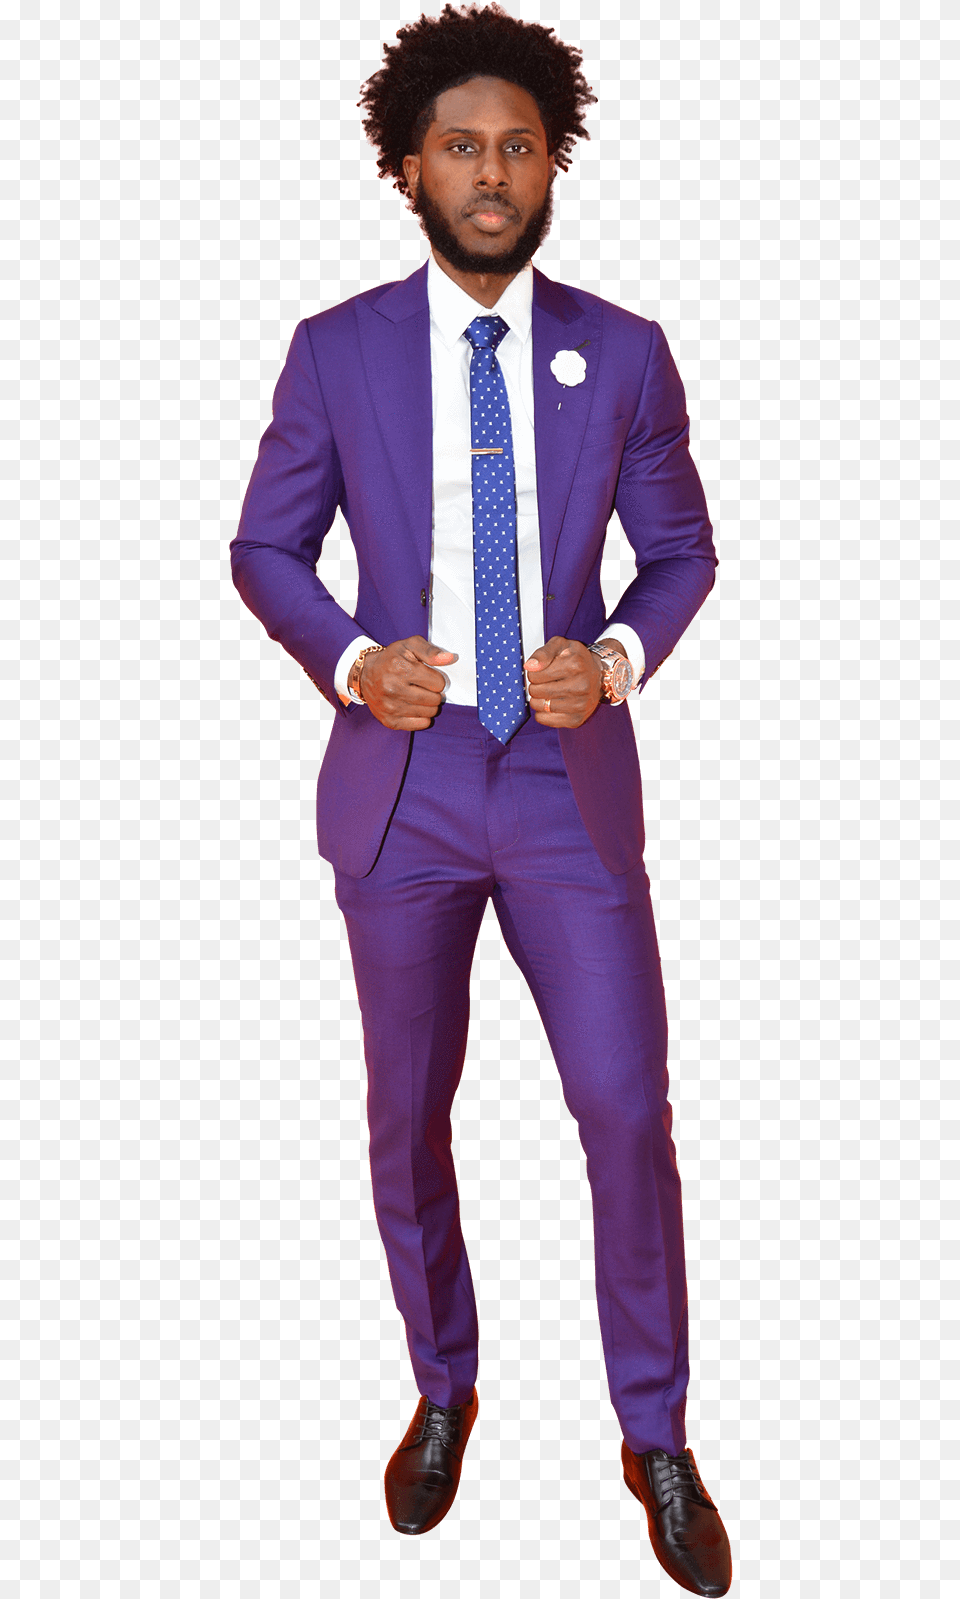 The Regal Purple Suitclass Lazyload Lazyload Fade, Accessories, Tie, Clothing, Suit Png Image